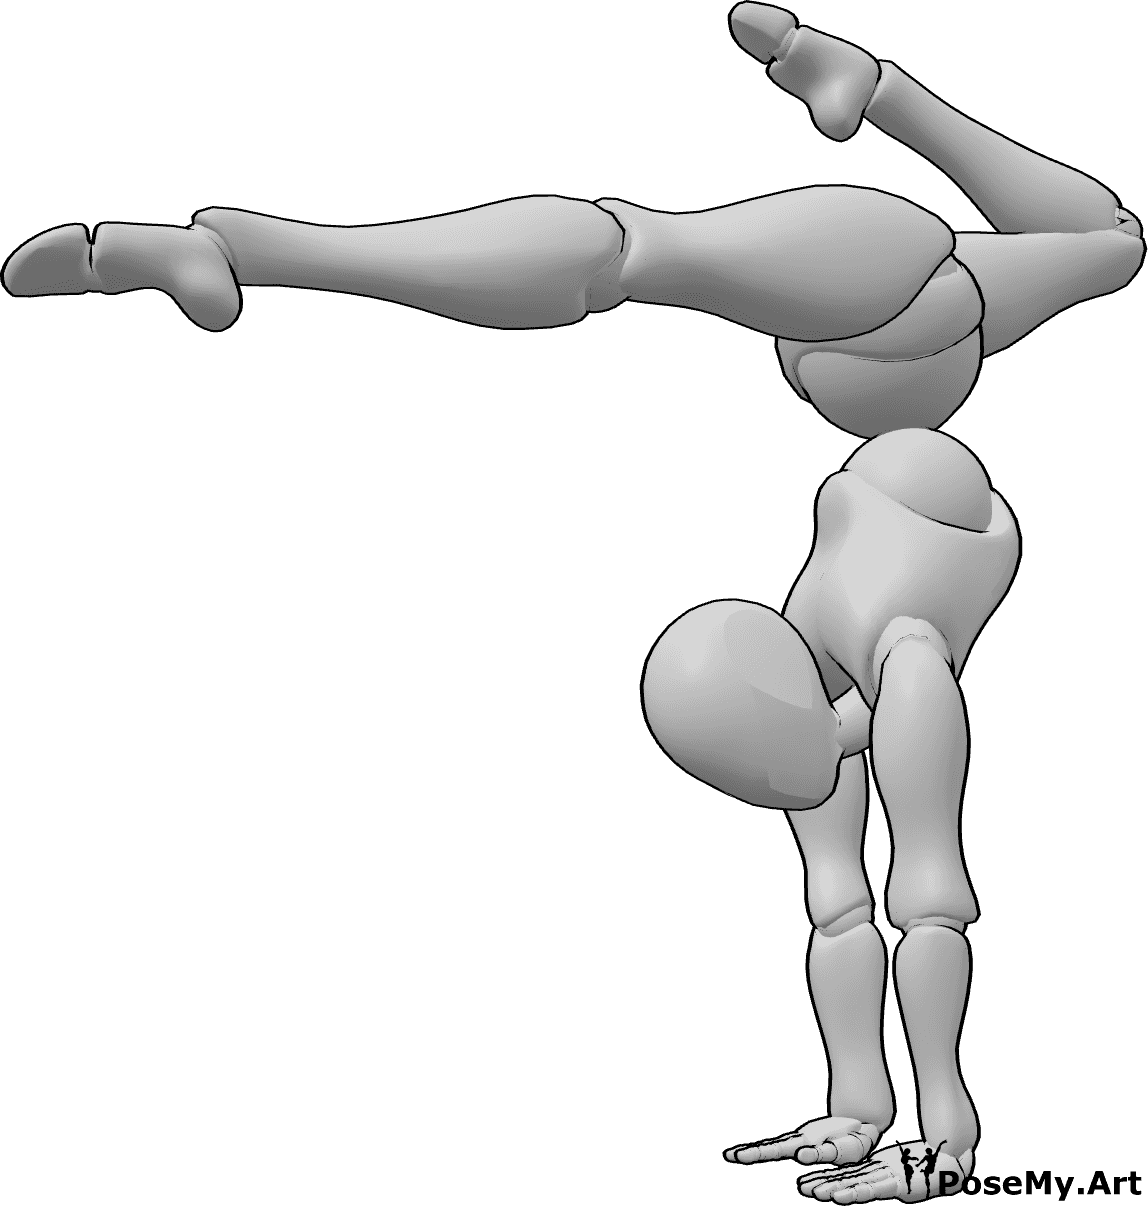 Pose Reference- Acrobatic handstanding pose - Female is performing an acrobatic handstanding pose